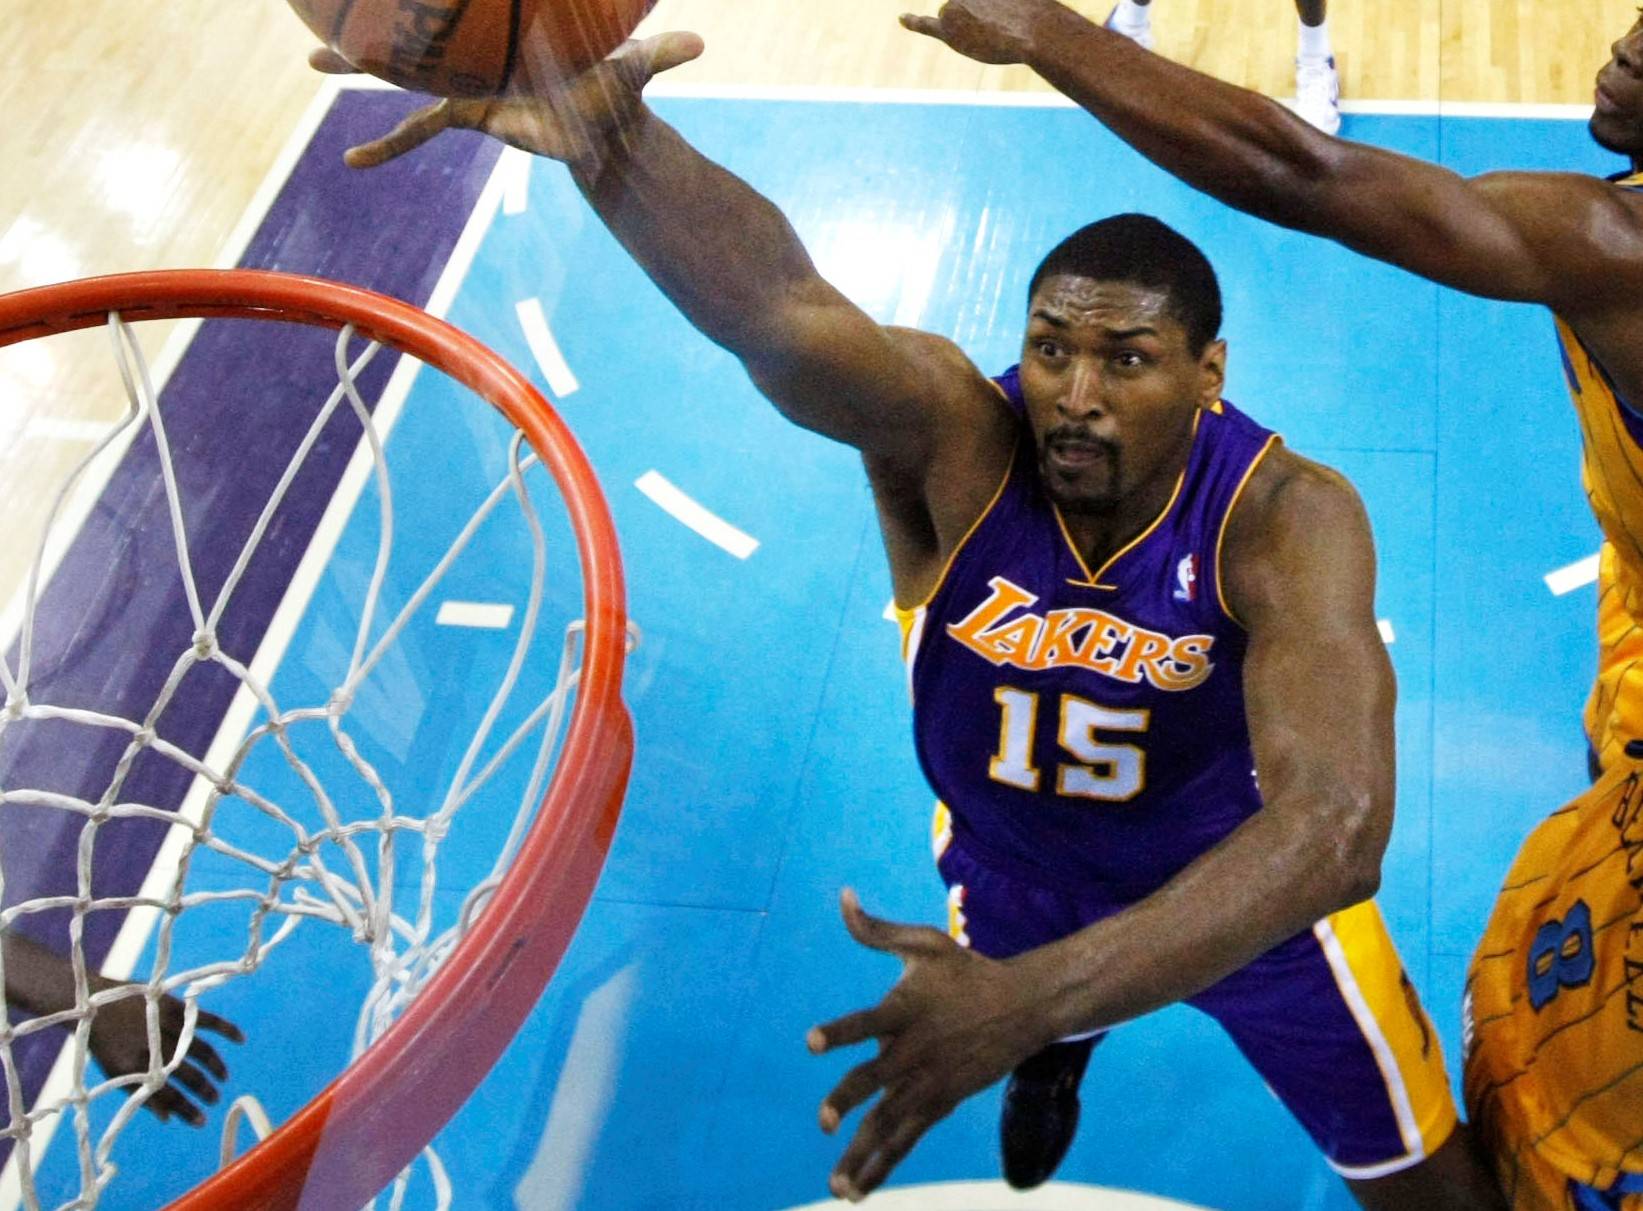 Lakers’ Ron Artest Honored - Once known as one of the NBA’s bad boys for his role in an epic brawl between basketball players and fans in 2004, the Lakers’ Ron Artest was selected for the J. Walter Kennedy Citizenship Award, presented annually by the Professional Basketball Writers Association. The award, announced Tuesday, is named for the former NBA commissioner and honors a player or coach for outstanding service and dedication to the community. Artest was picked for his attempts to promote mental health awareness. His efforts include fund-raising, appearing before Congress to support the Mental Health in Schools Act and overall advocacy of the issue. He even raffled off his 2010 NBA championship ring, raising more than $650,000.